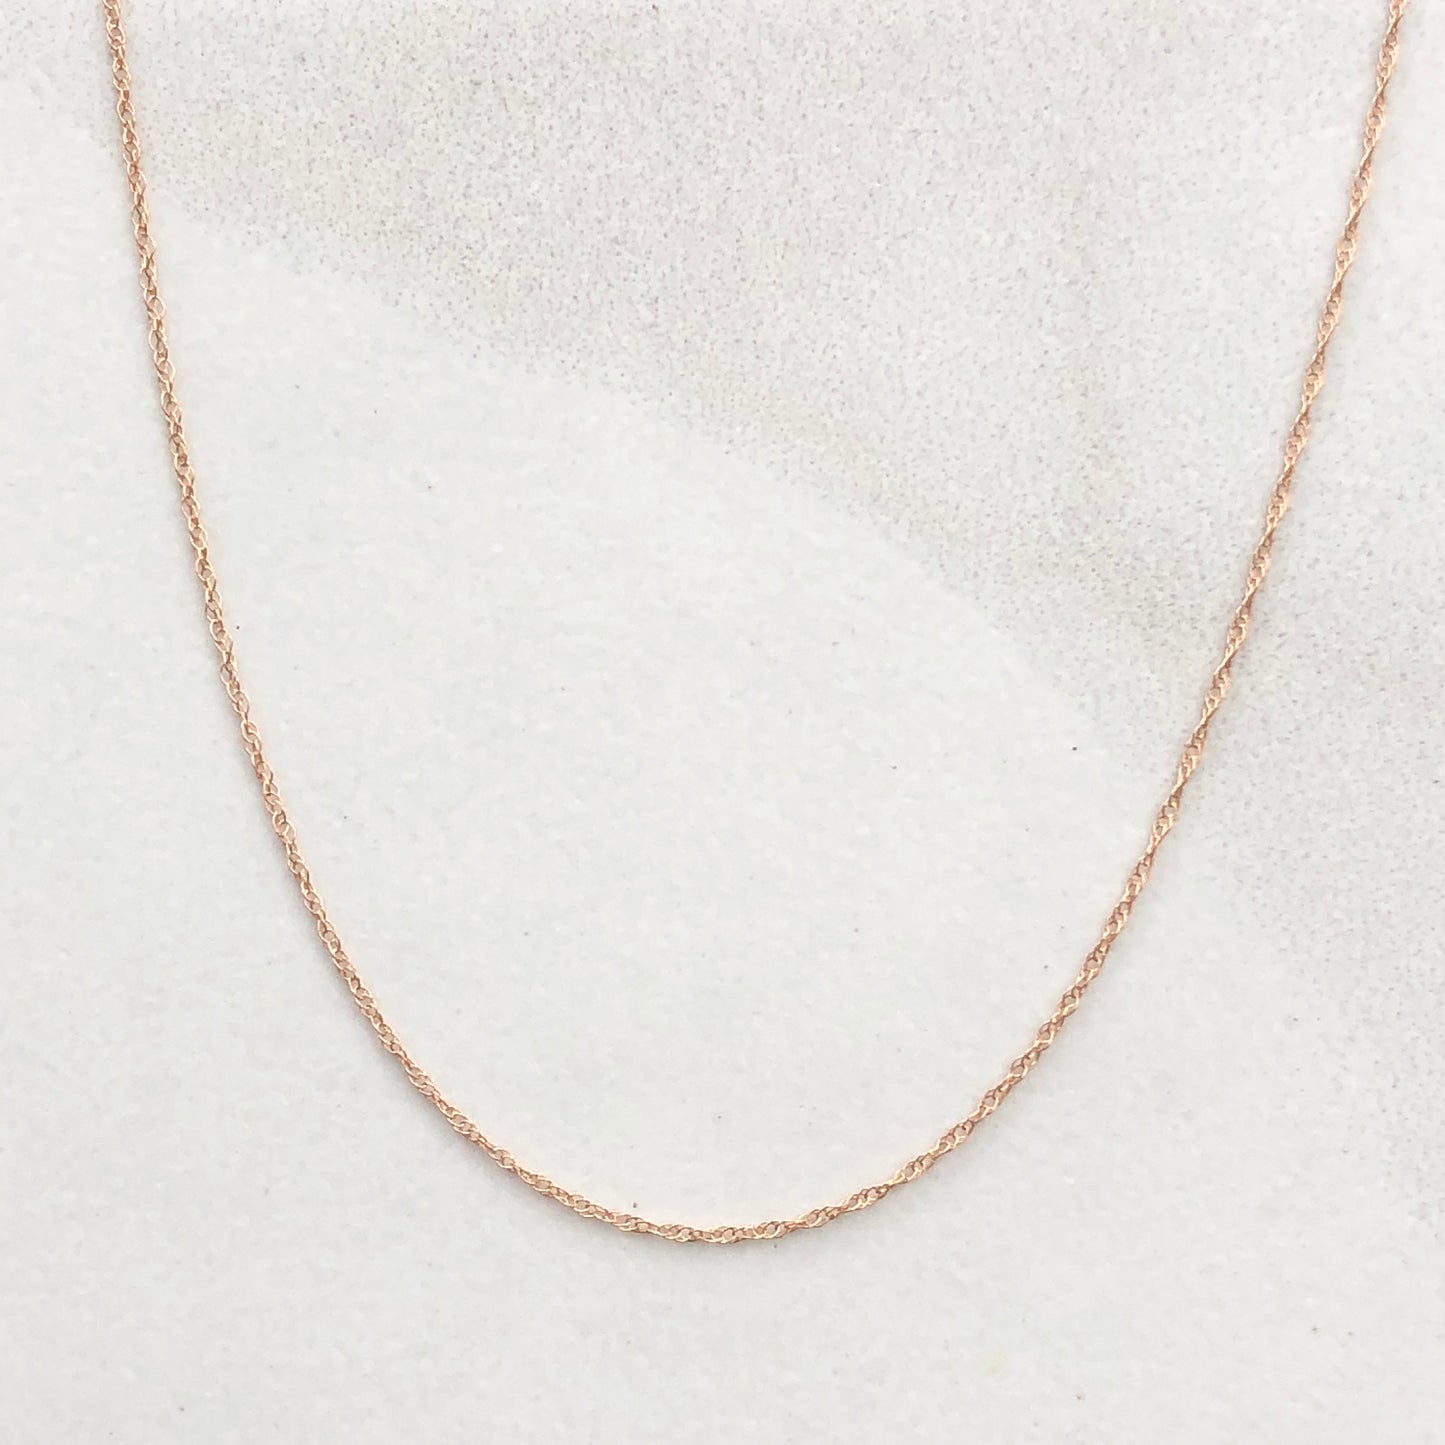 10KT Rose Gold Cable Rope Chain Necklace .50mm, 10KT Rose Gold Cable Rope Chain Necklace .50mm - Legacy Saint Jewelry